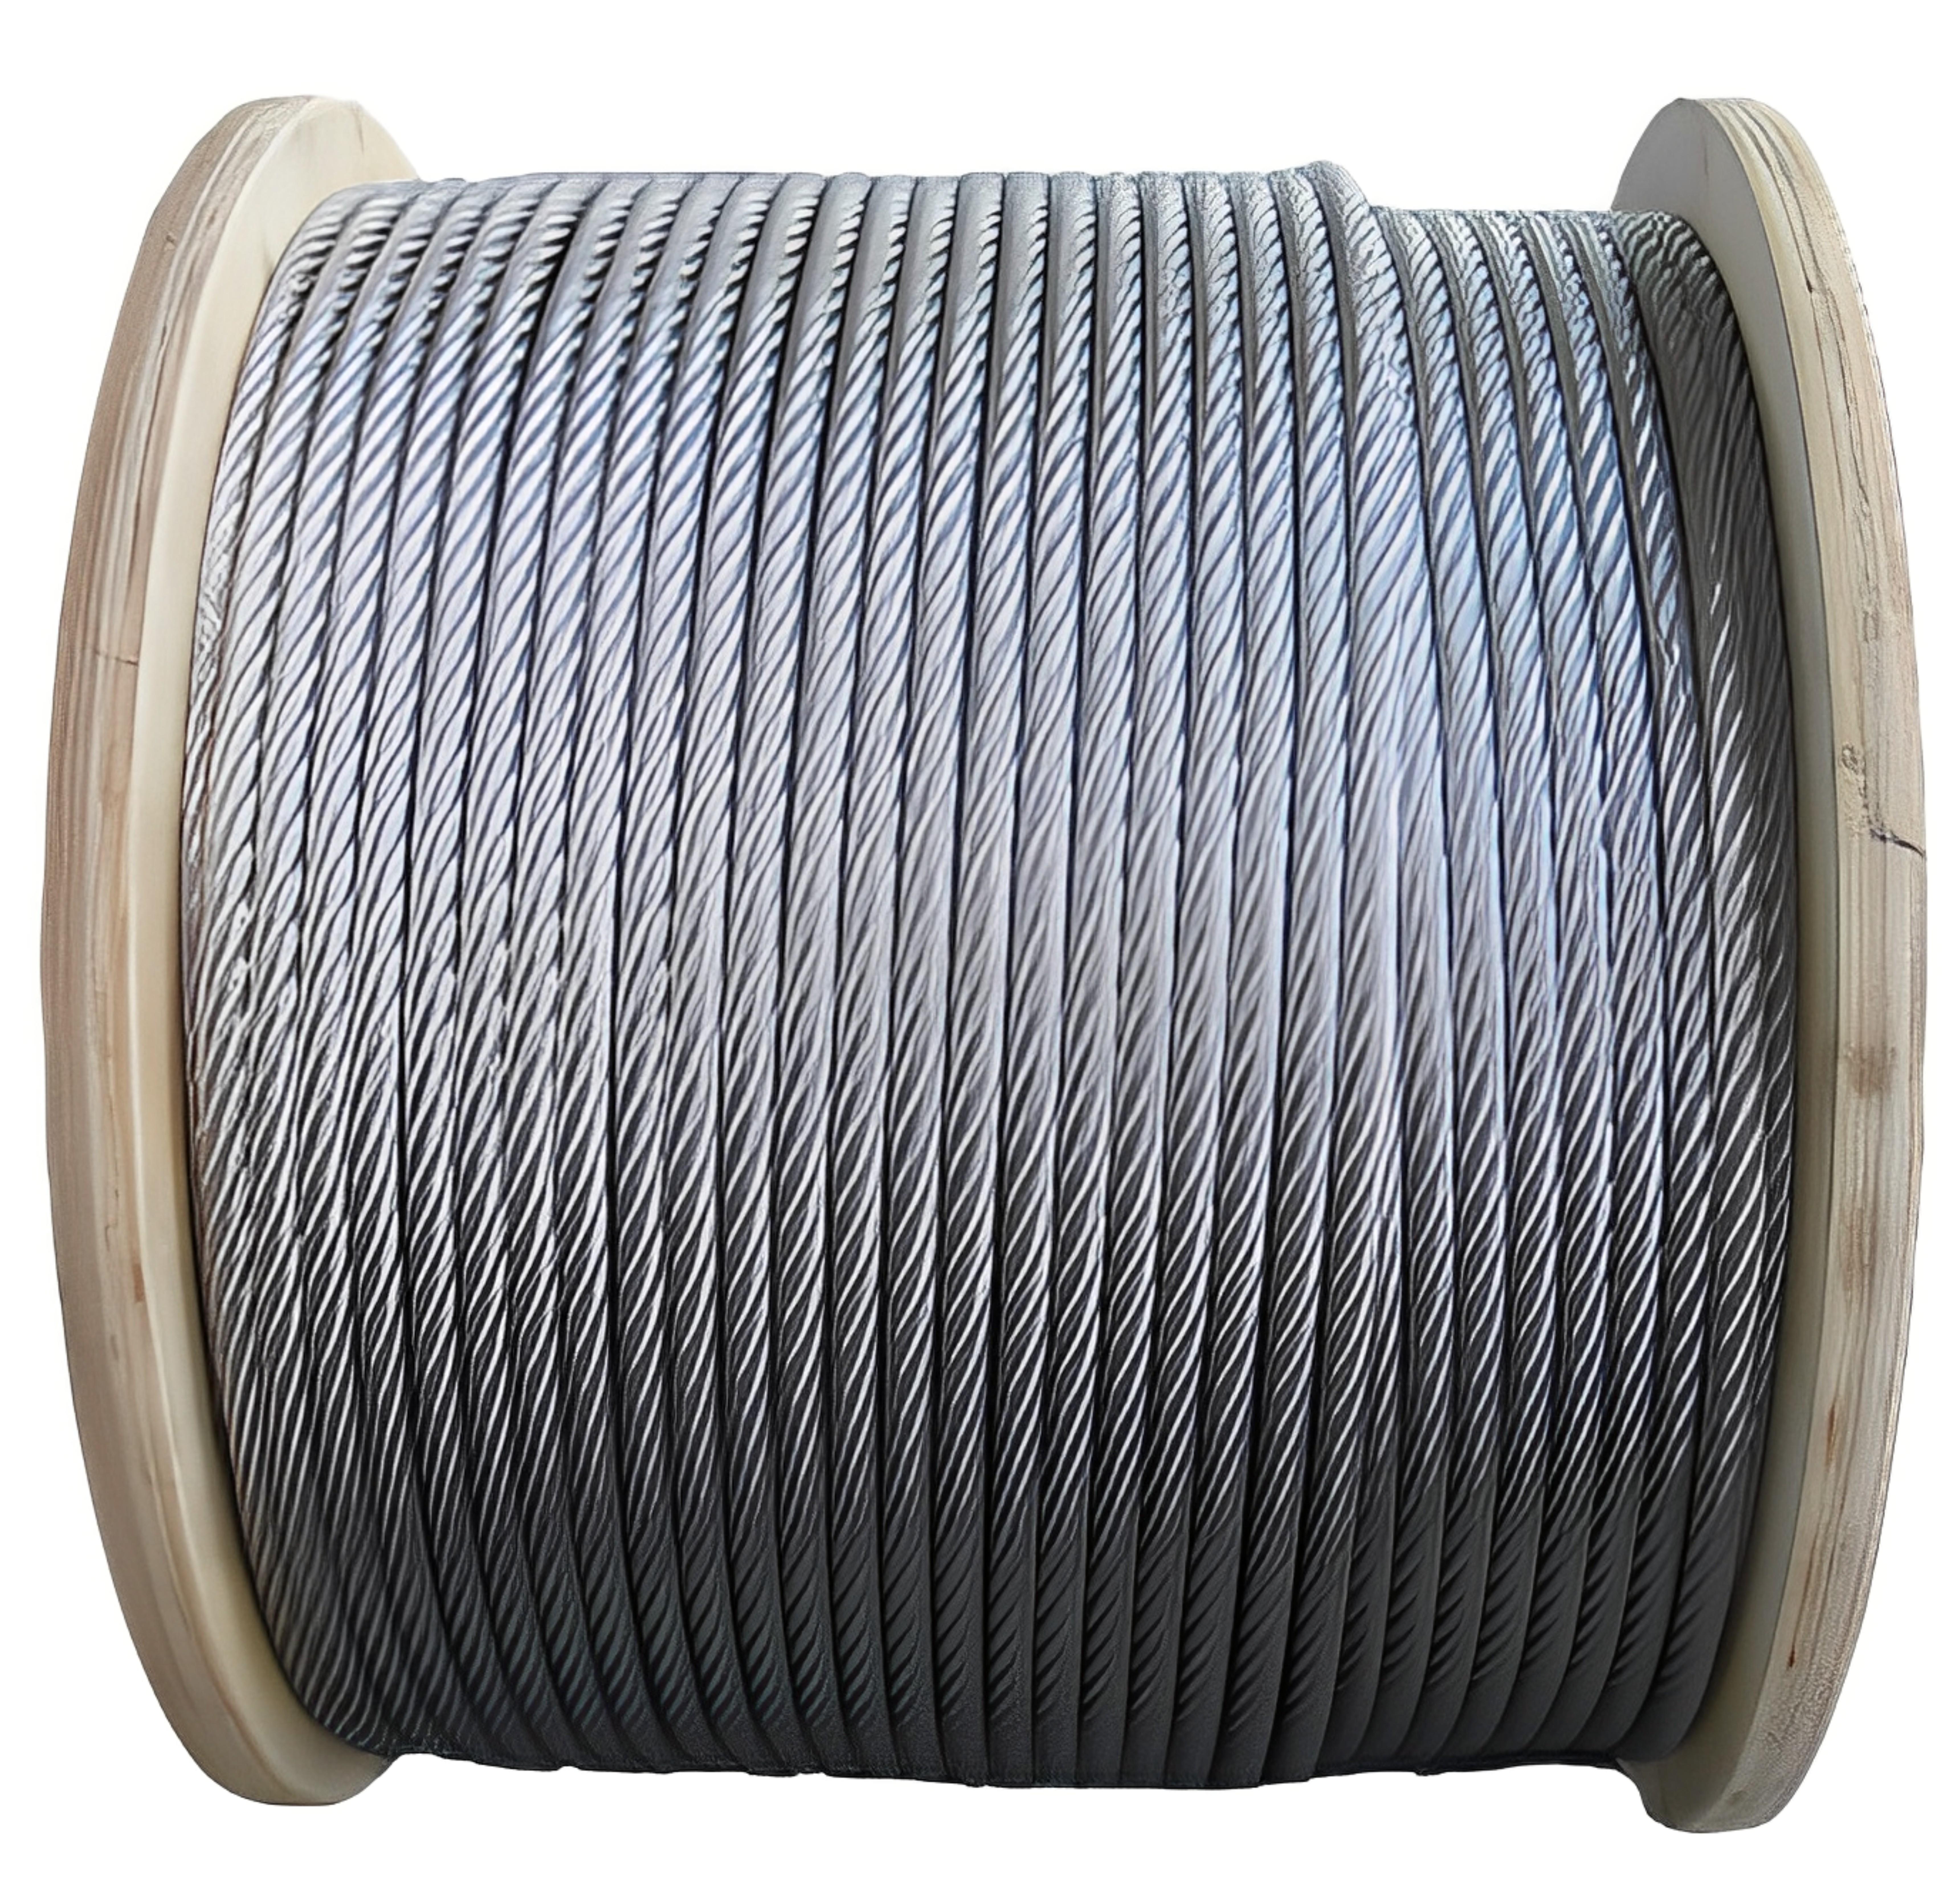 Buy 12 mm Steel Wire Rope 6 x 36 1770 N/mm2 100 - 200 m online at best  rates in India